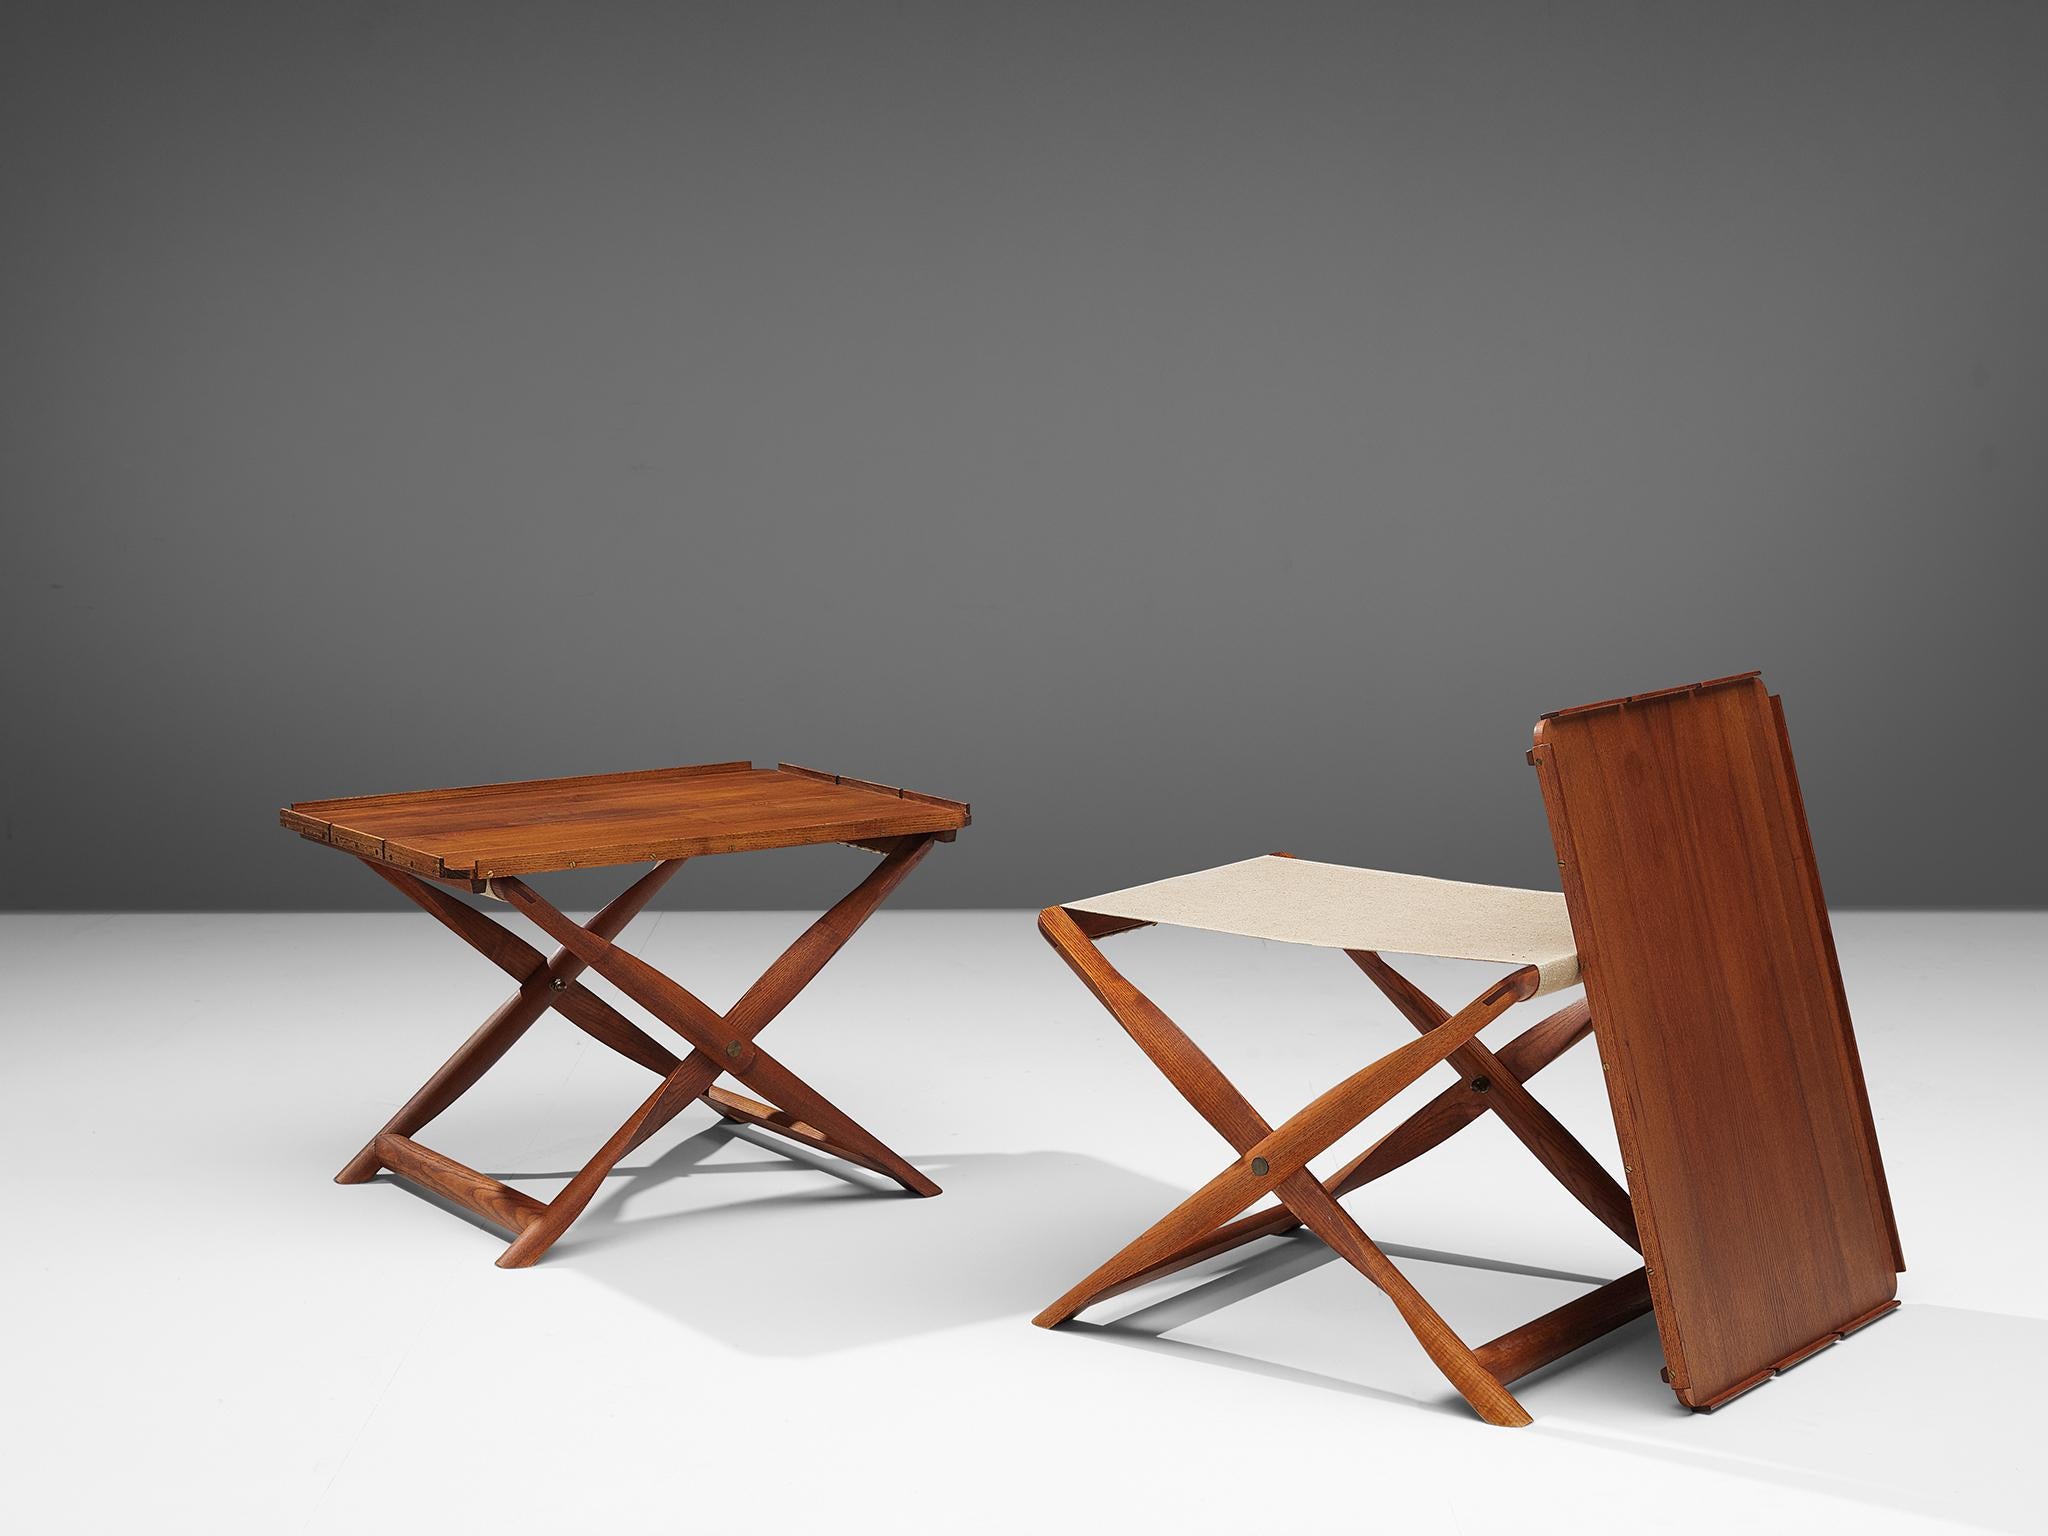 Kaare Klint for Rud Rasmussen, propeller stool and tray table, darkened ash and fabric, Denmark, 1960s.

Pair of propeller stools in ash with linen seats by Kaare Klint for Rud Rasmussen. Klint designed the concept for this stool in 1930 around the